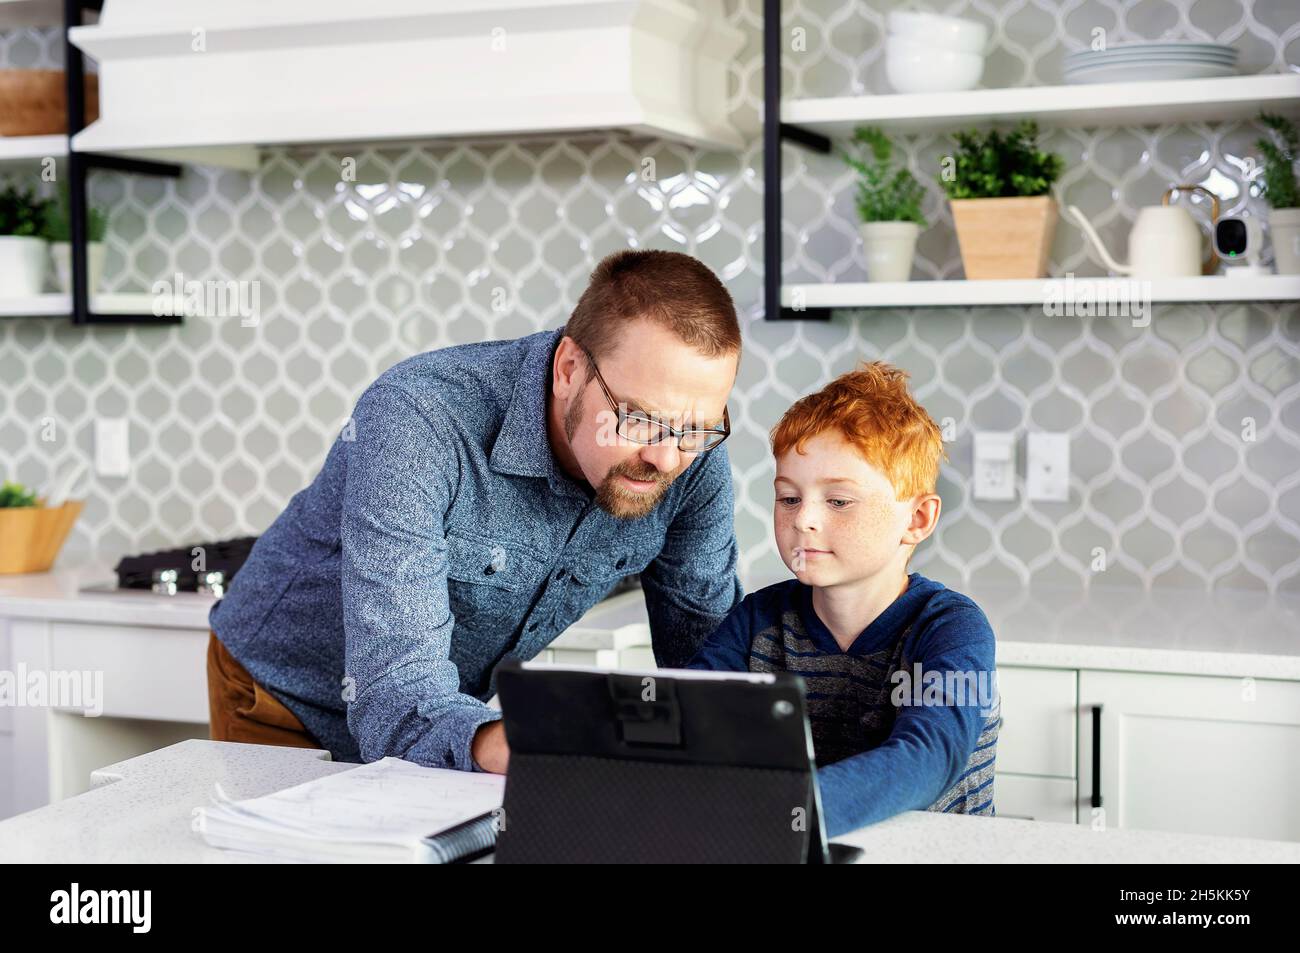 Father helping son with homework in the home kitchen; Edmonton, Alberta, Canada Stock Photo